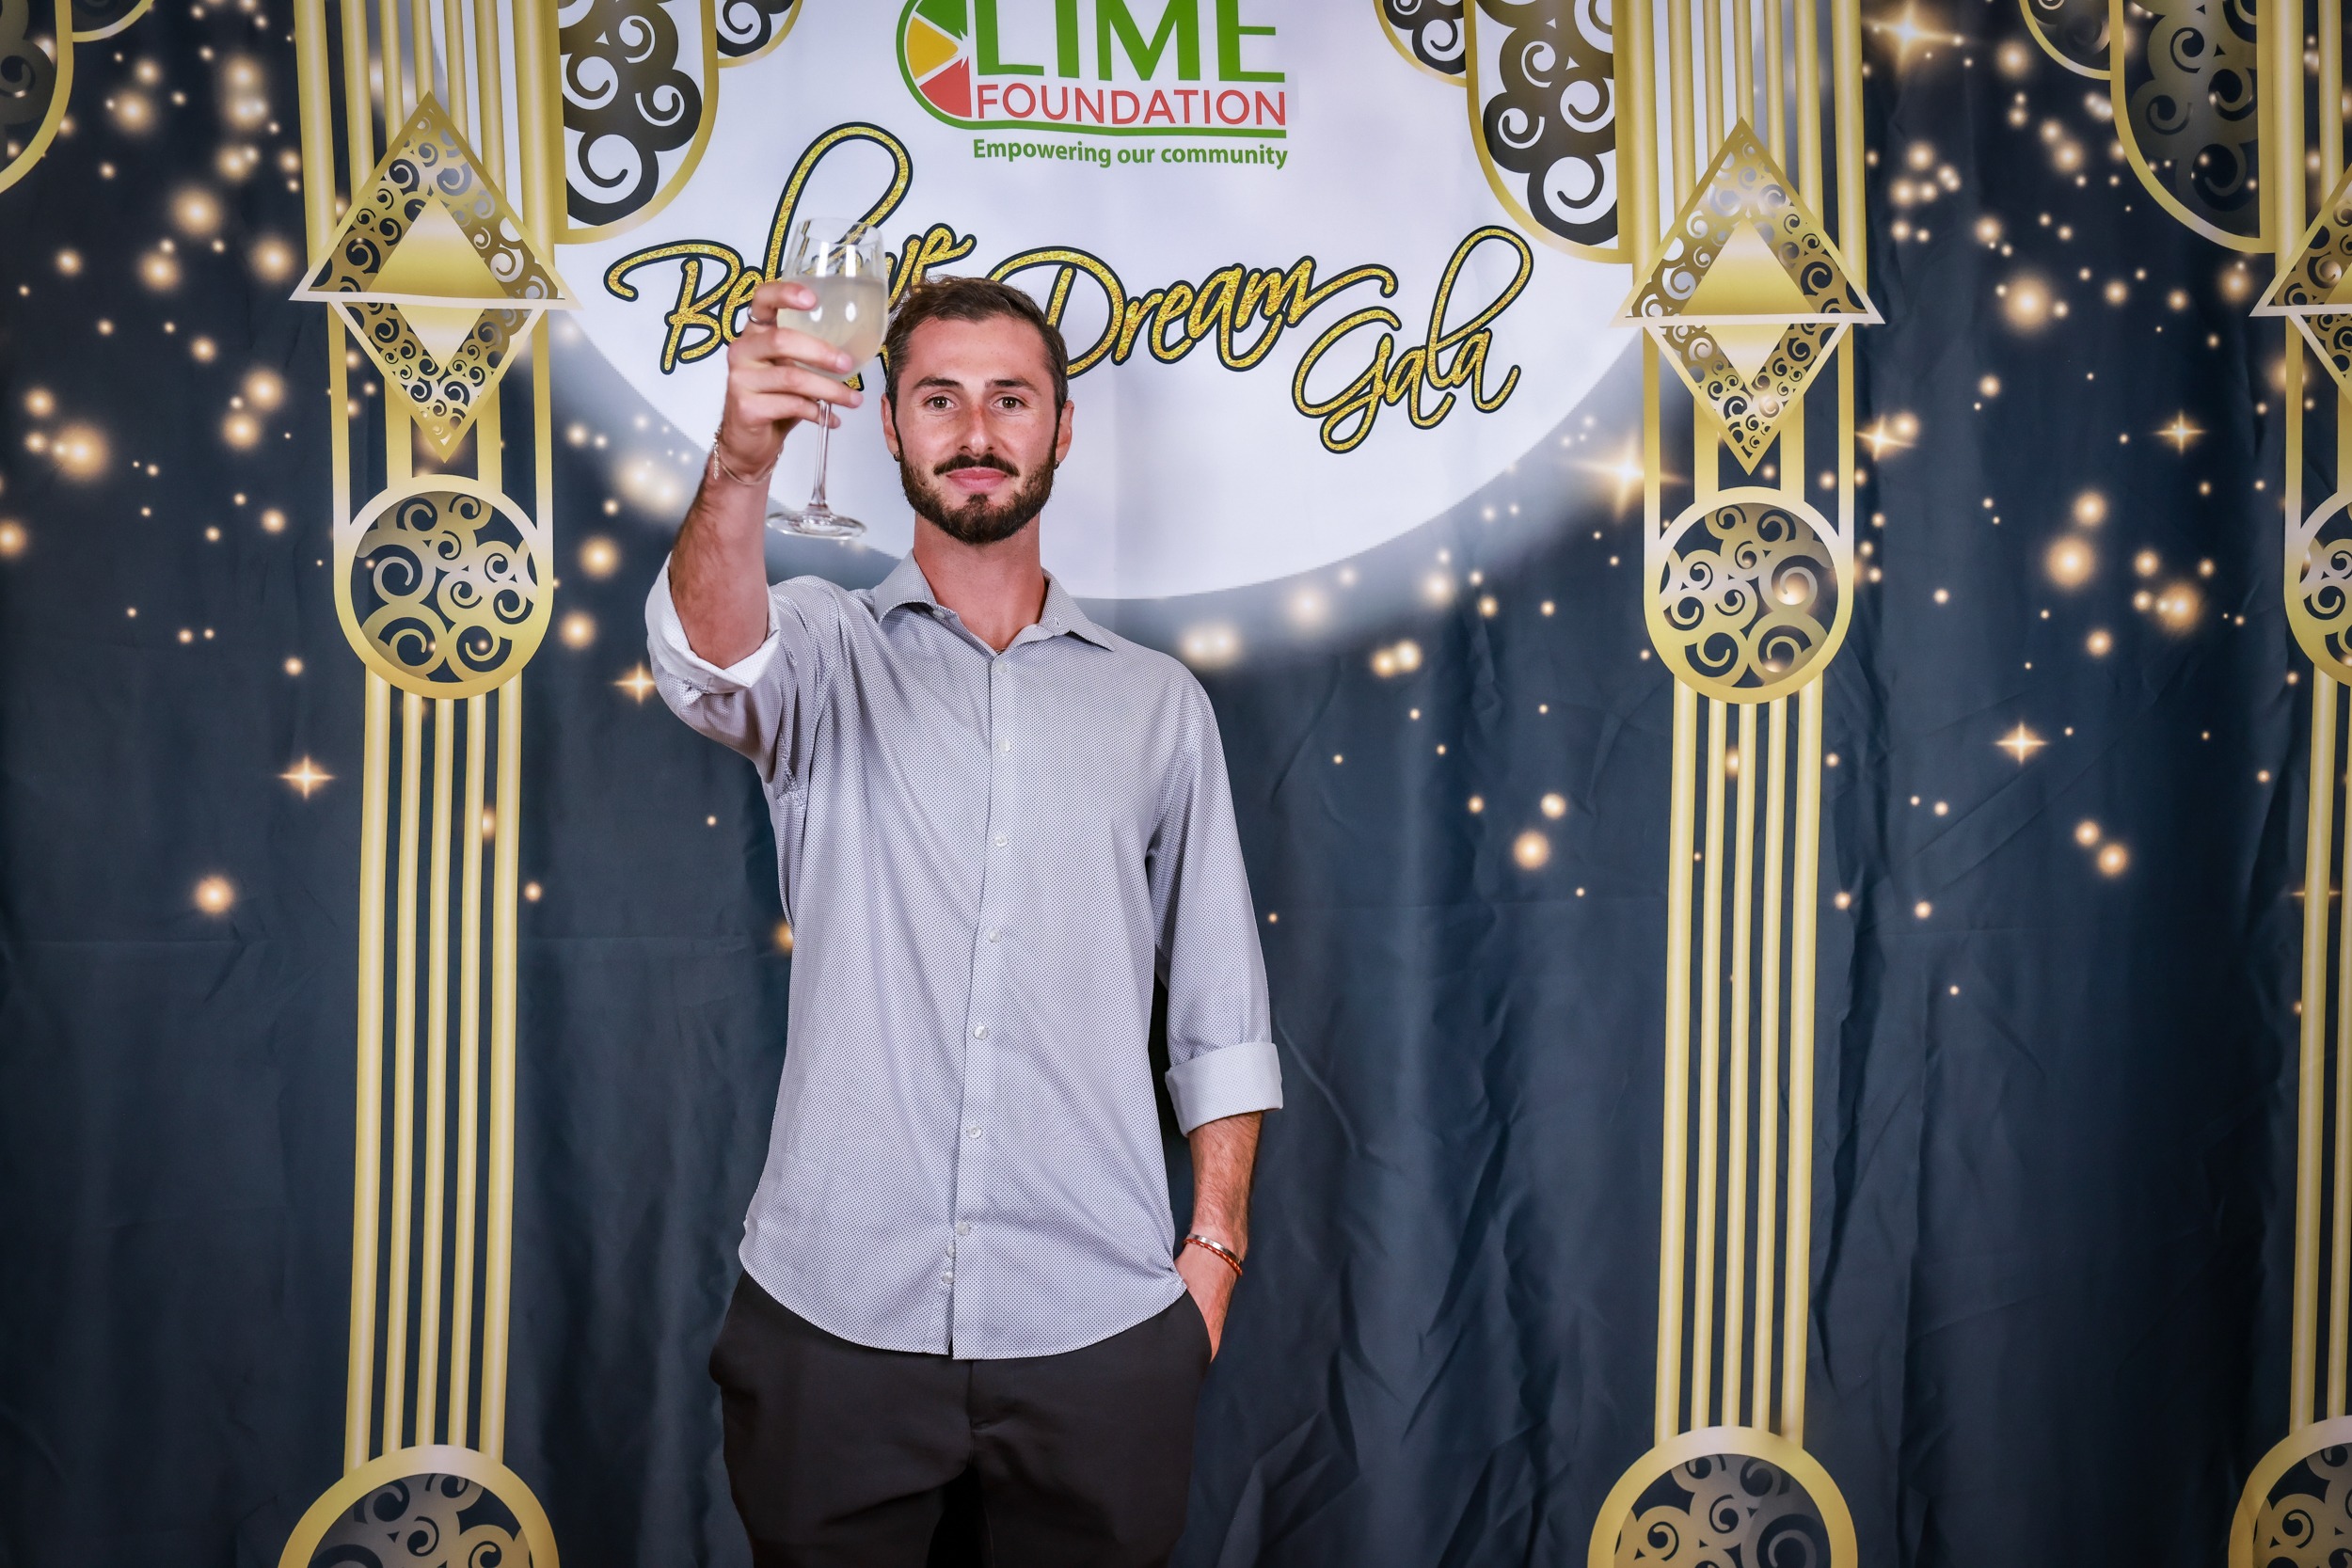 A man holding a glass of champagne in front of a backdrop at The LIME Foundation event in Santa Rosa.